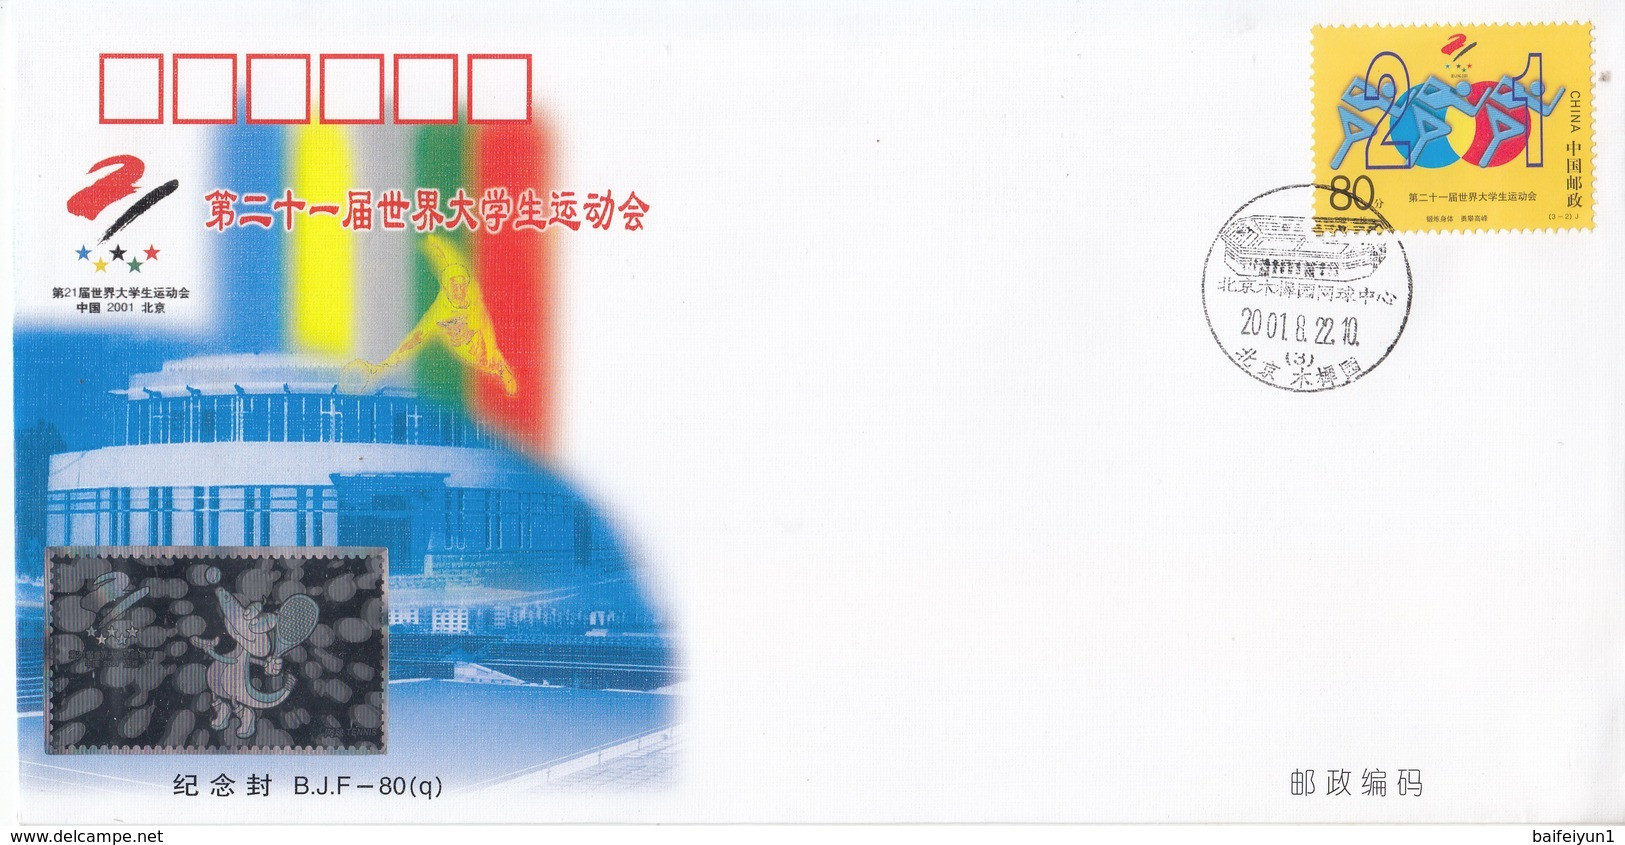 China 2001 B.J.F-80(q)Holographic Commemorative Covers of the 21st Universiade 12V